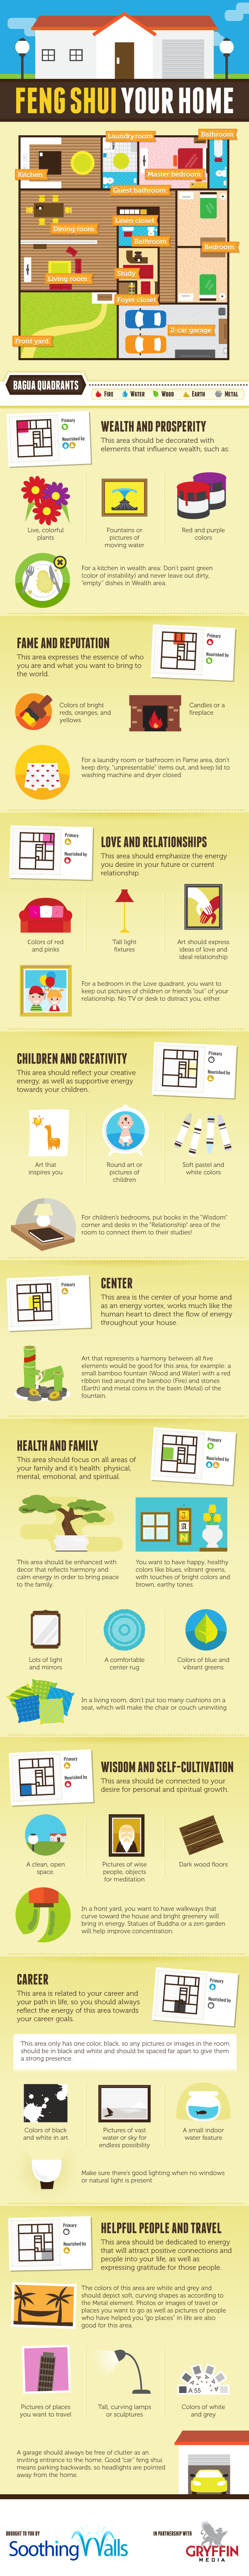 Feng Shui infographic